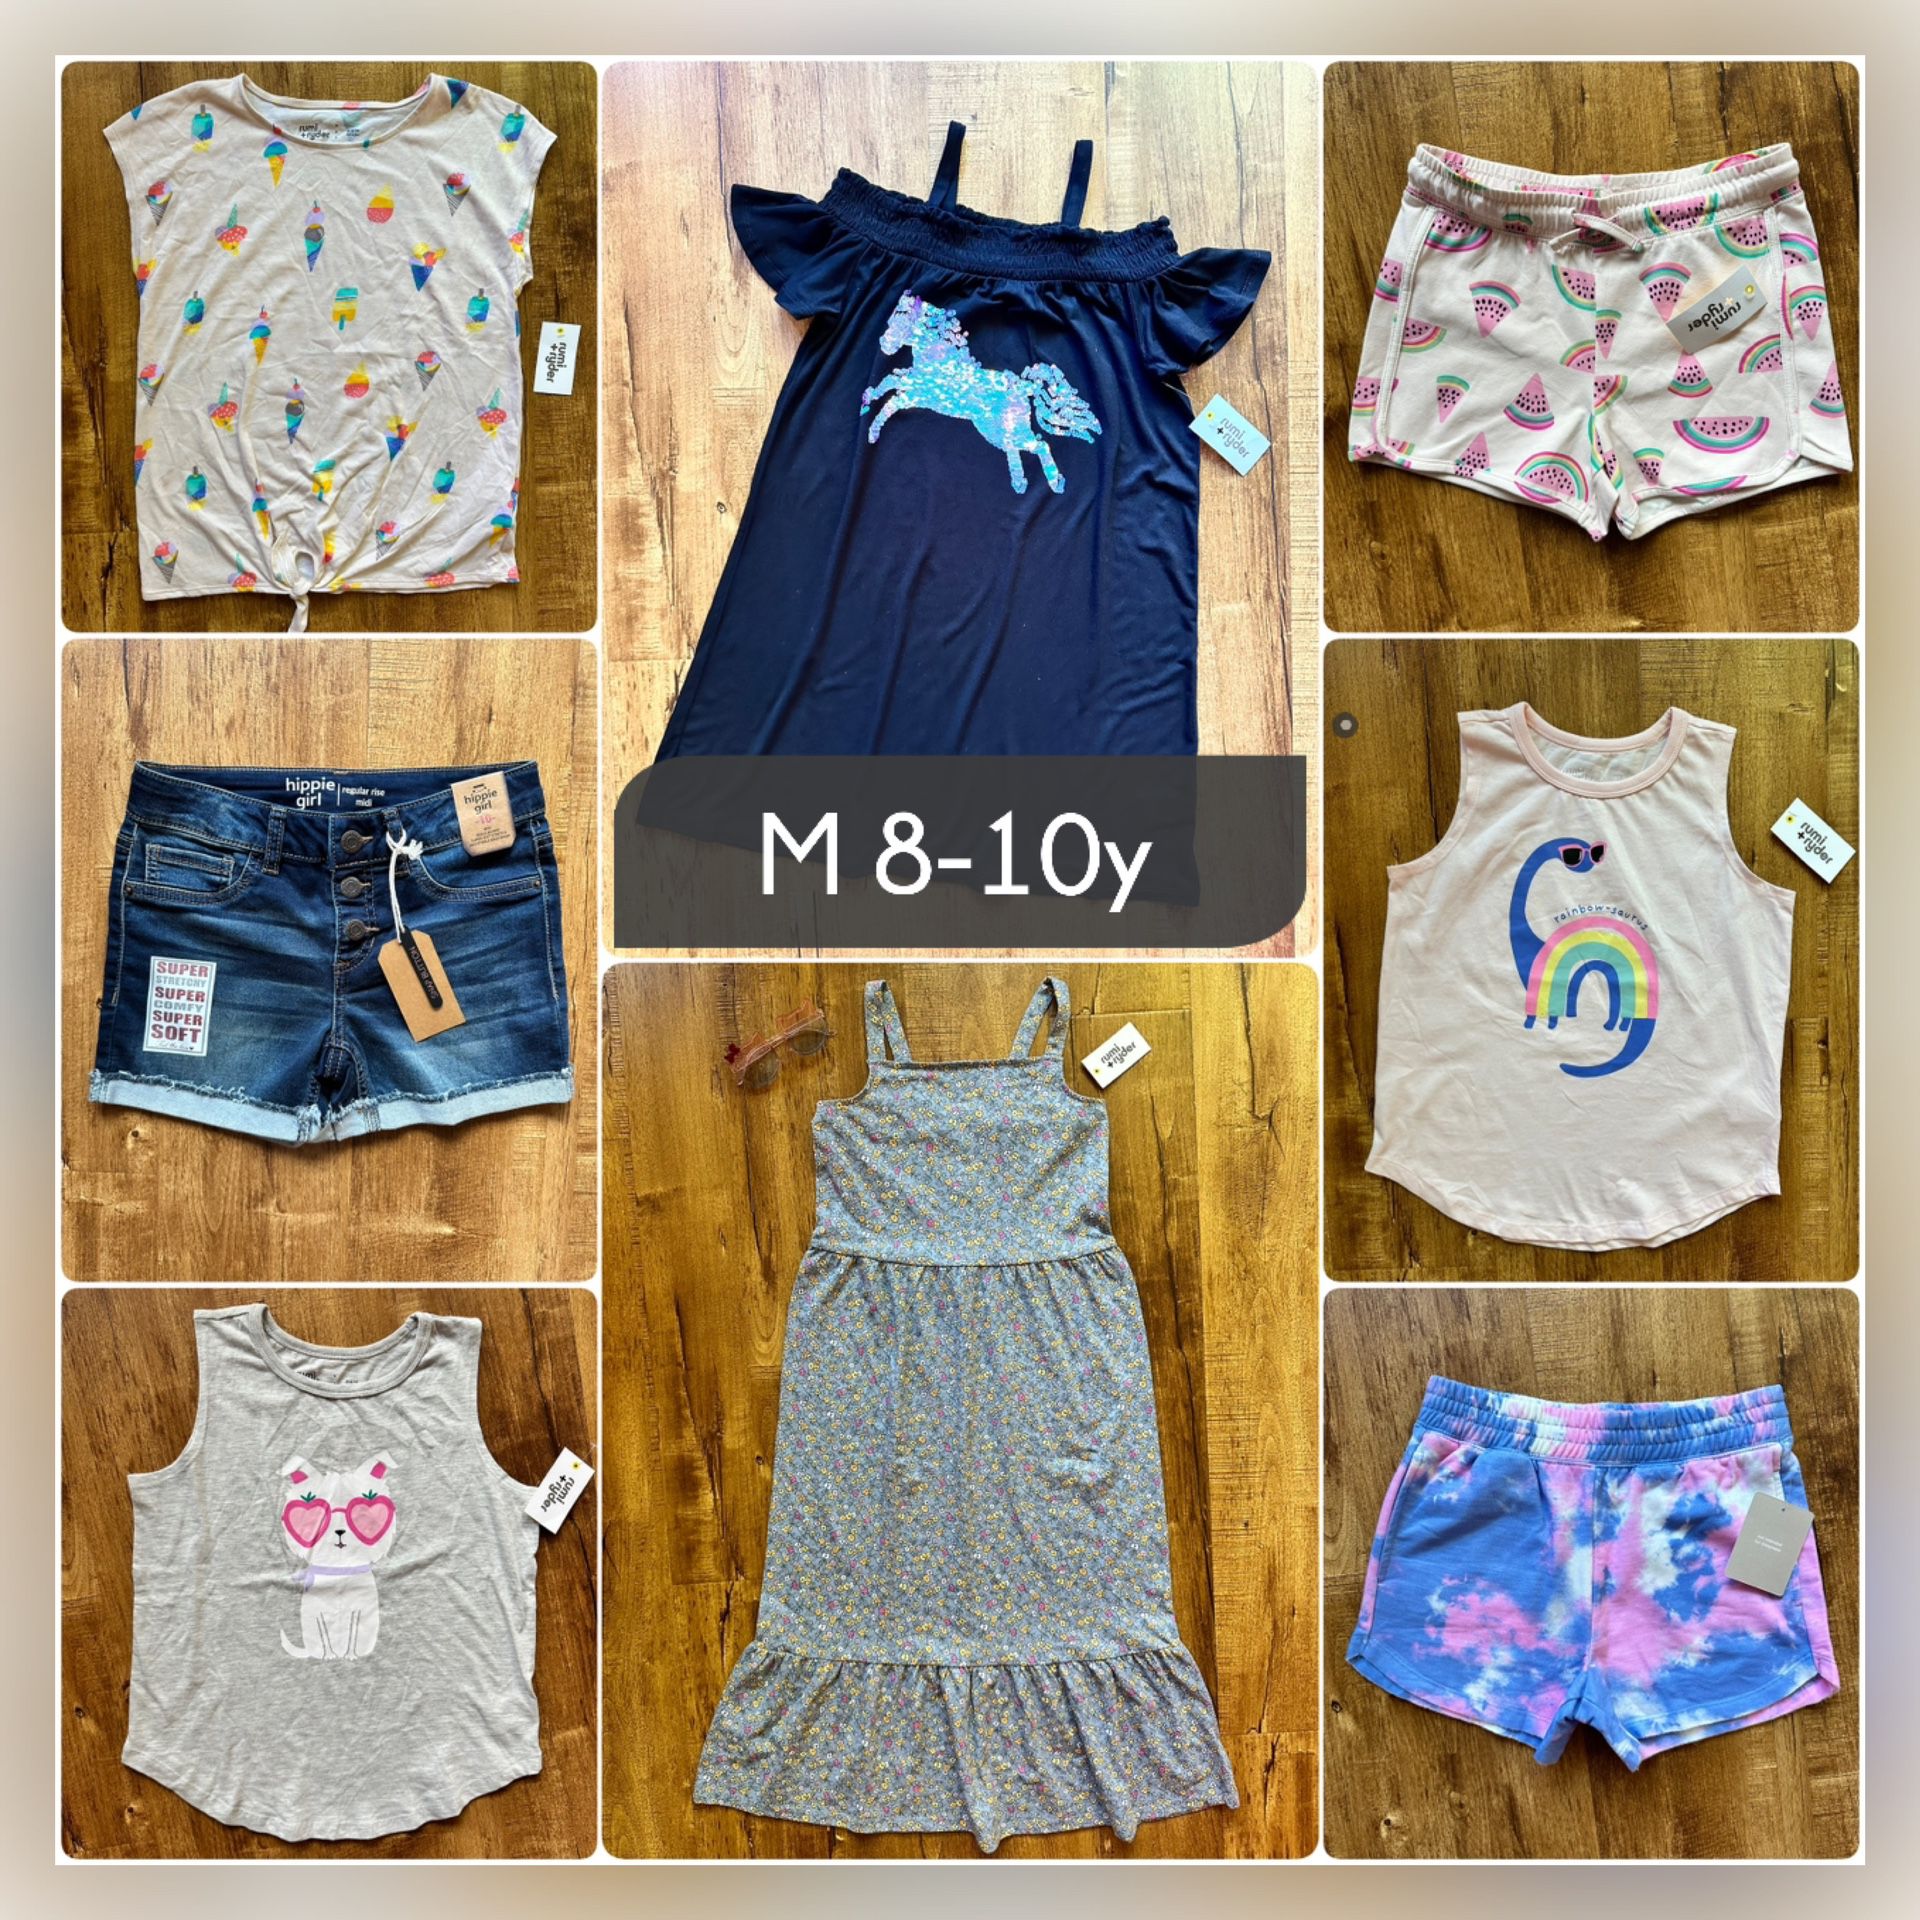 lot of summer clothes for a girl 8-10 years old.